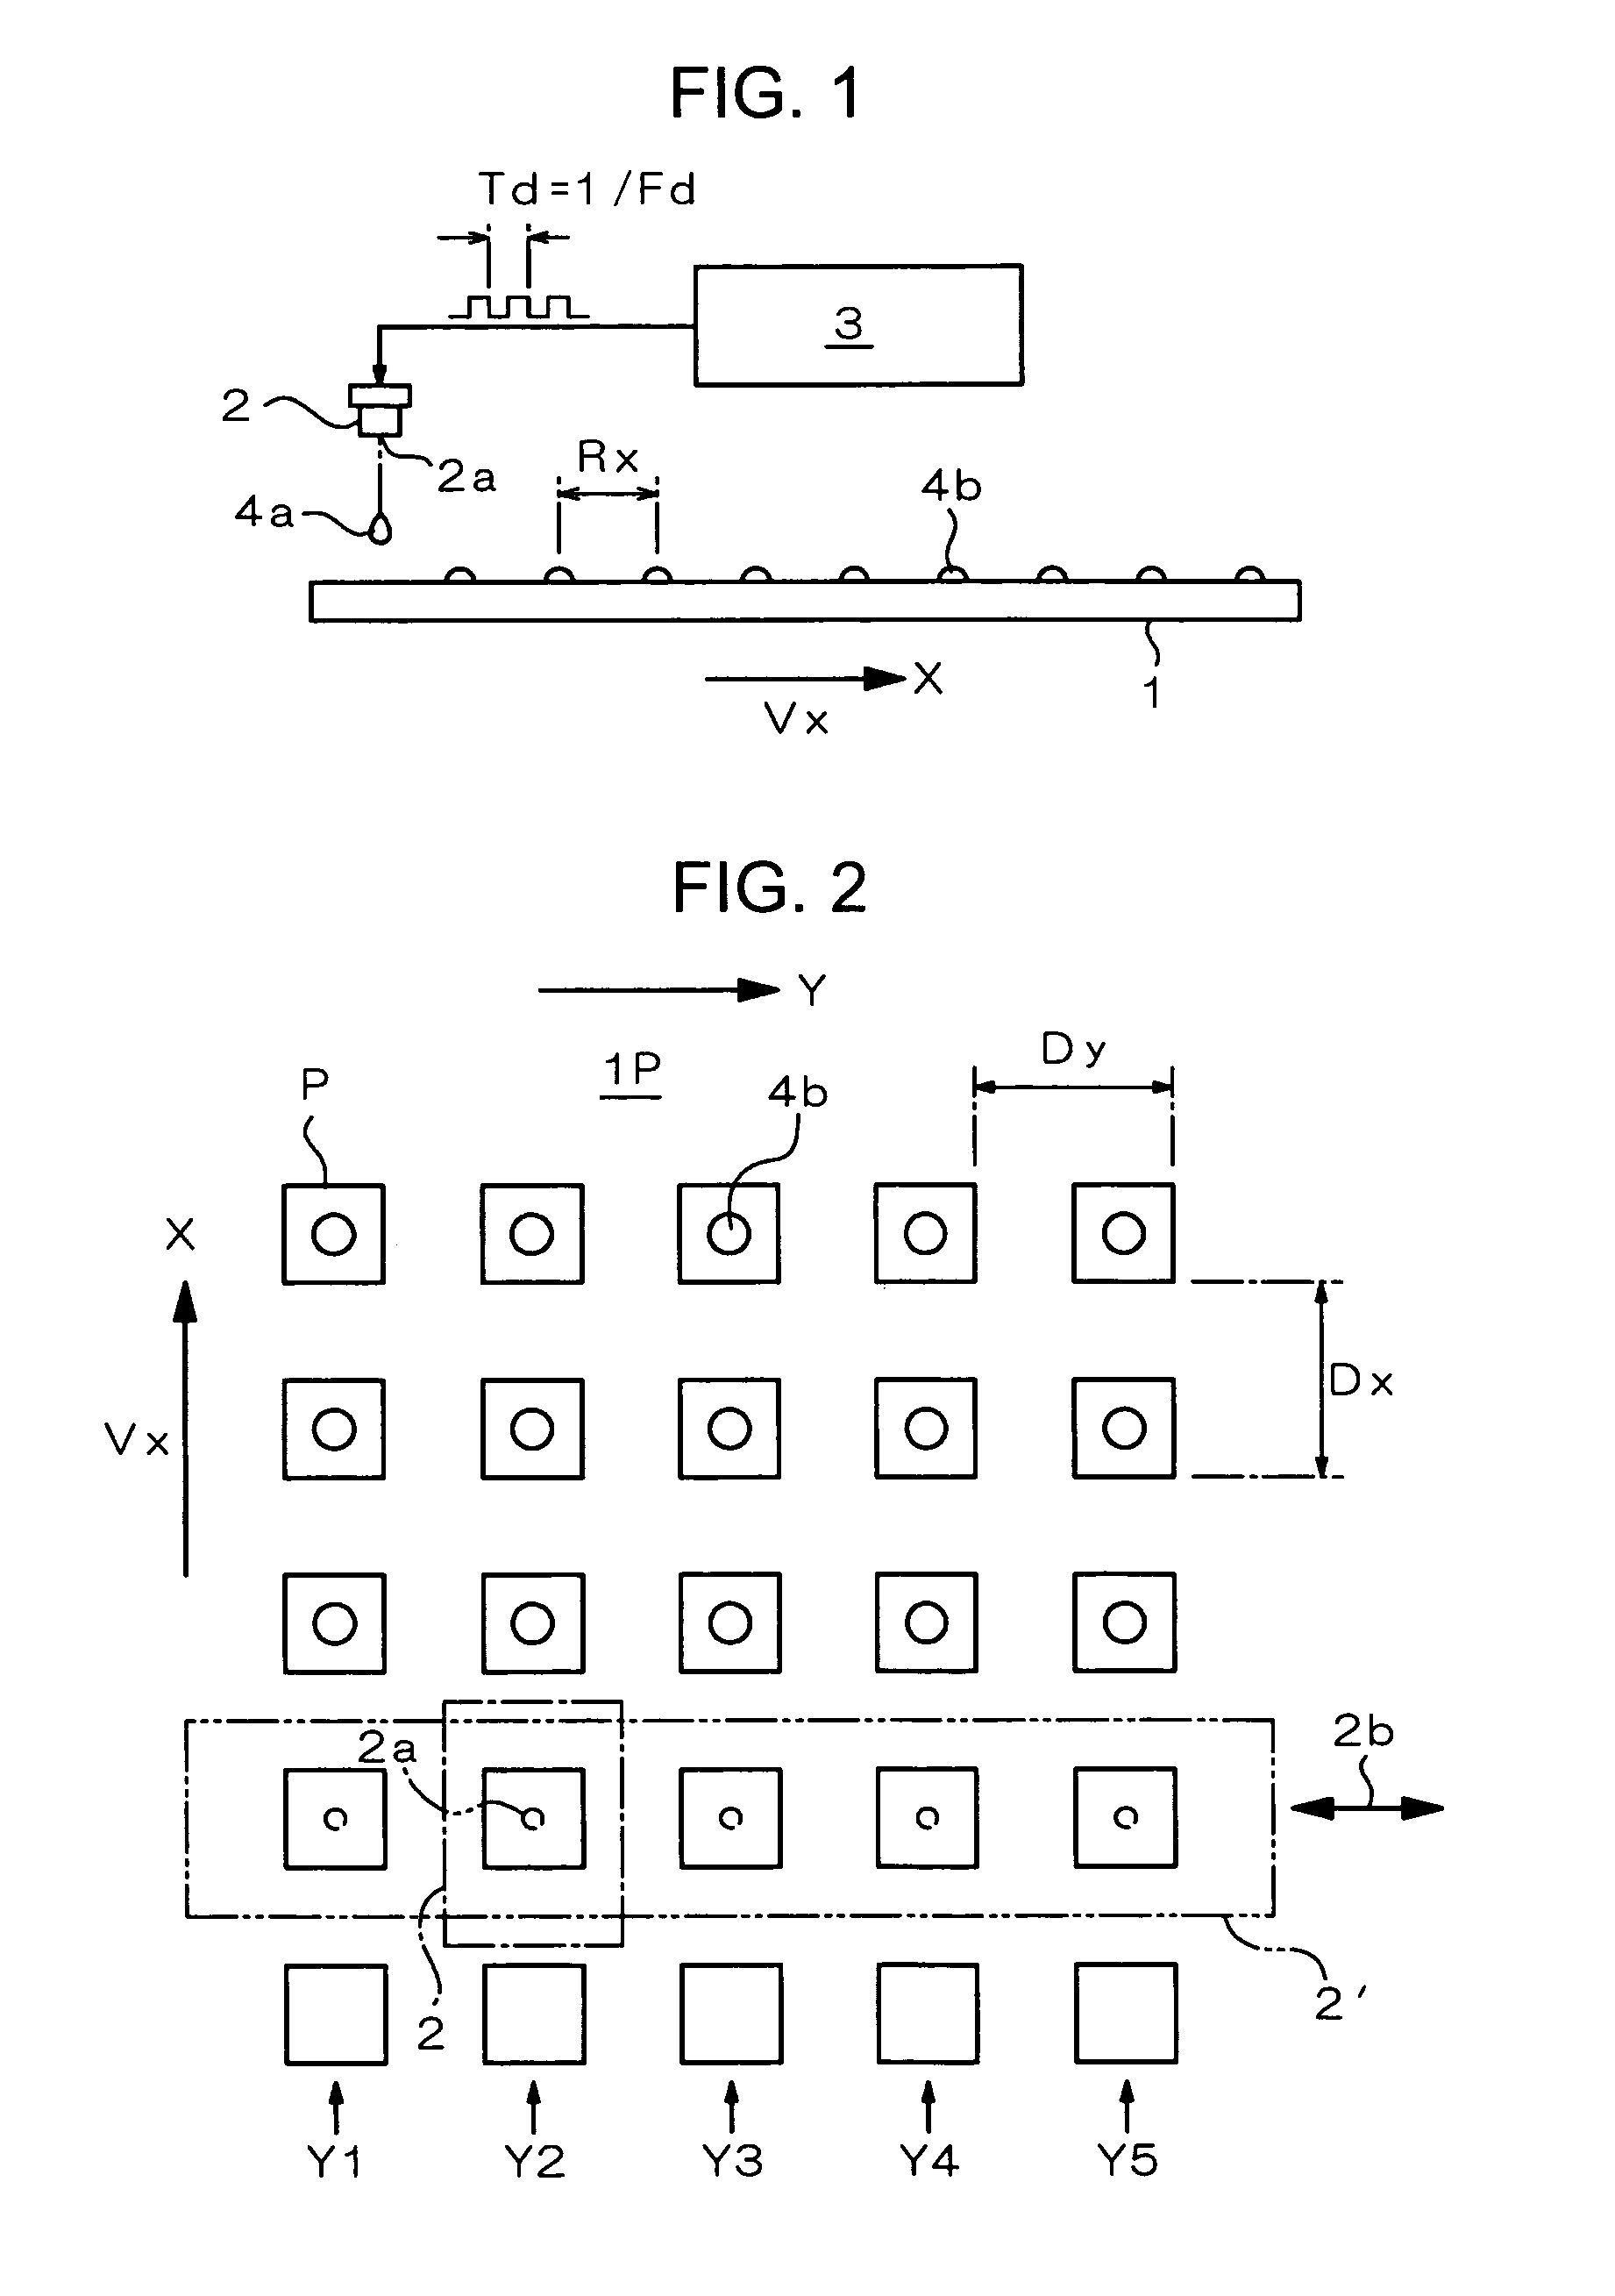 Film forming method for manufacturing planar periodic structure having predetermined periodicity